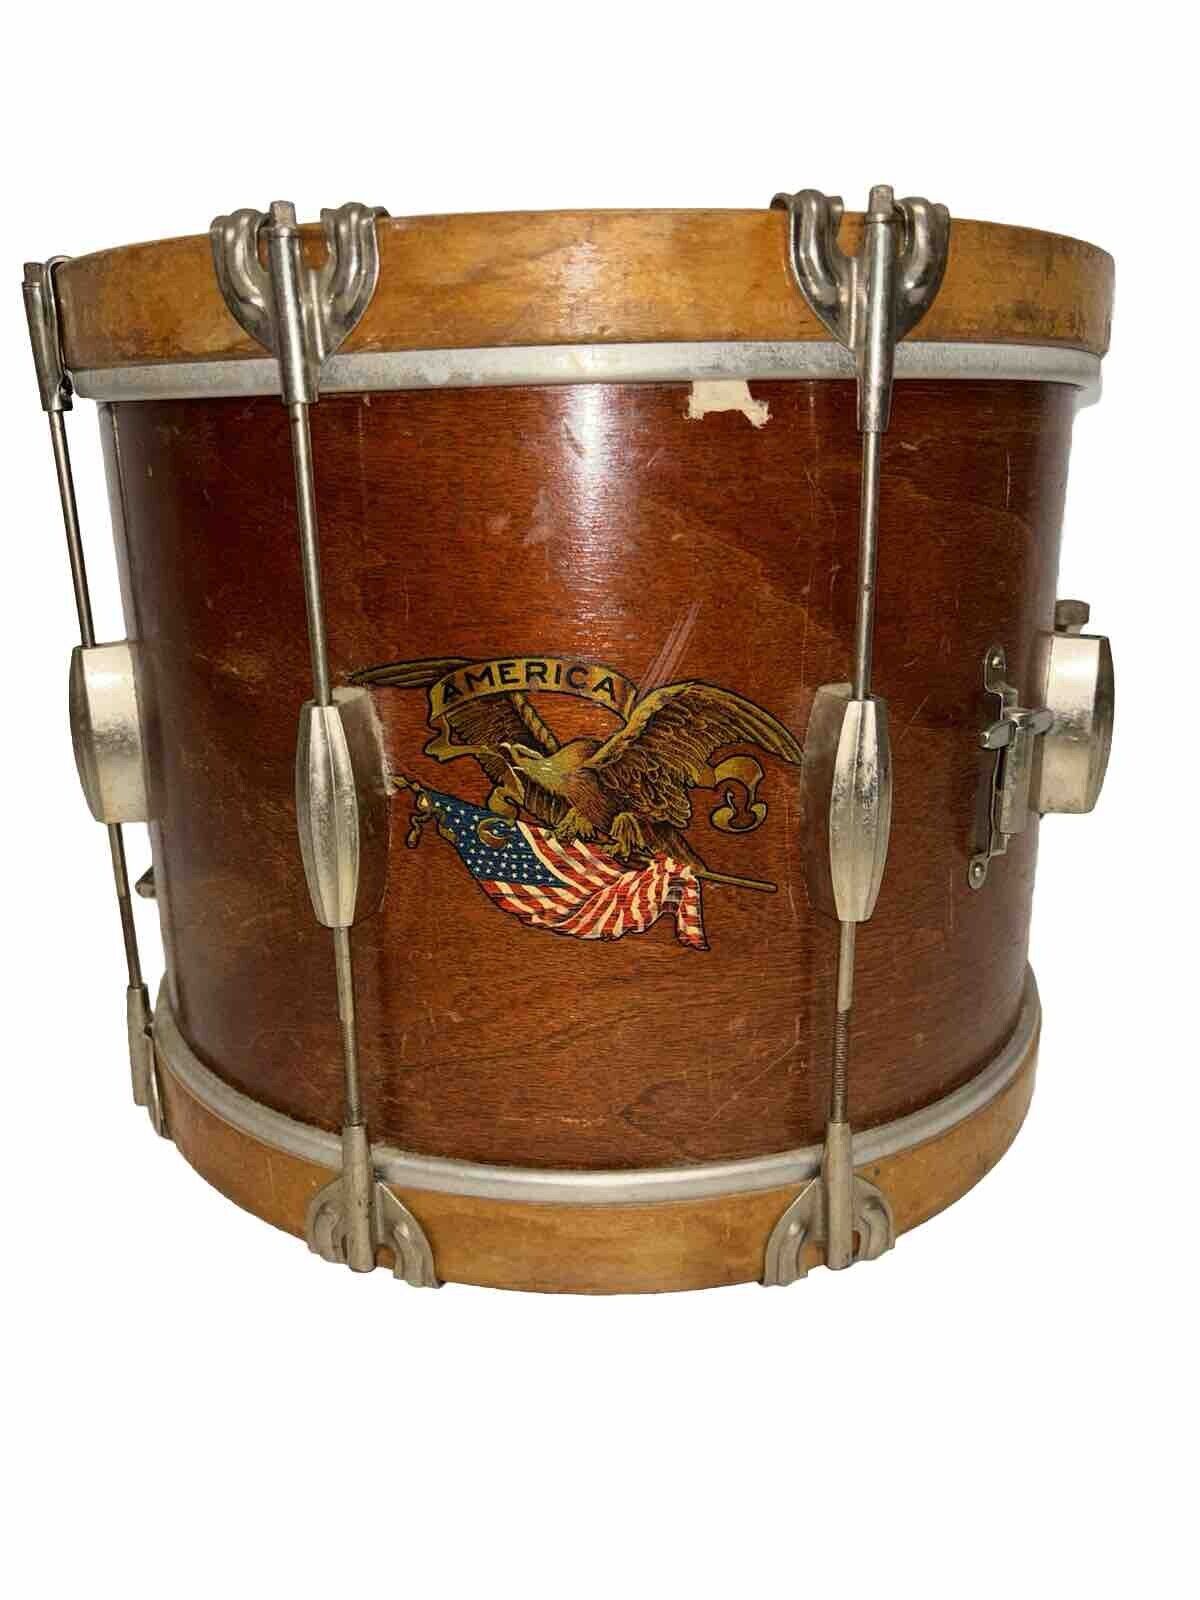 Antique 1940s Slingerland Marching Snare drum Painted Patriotic EAGLE USA